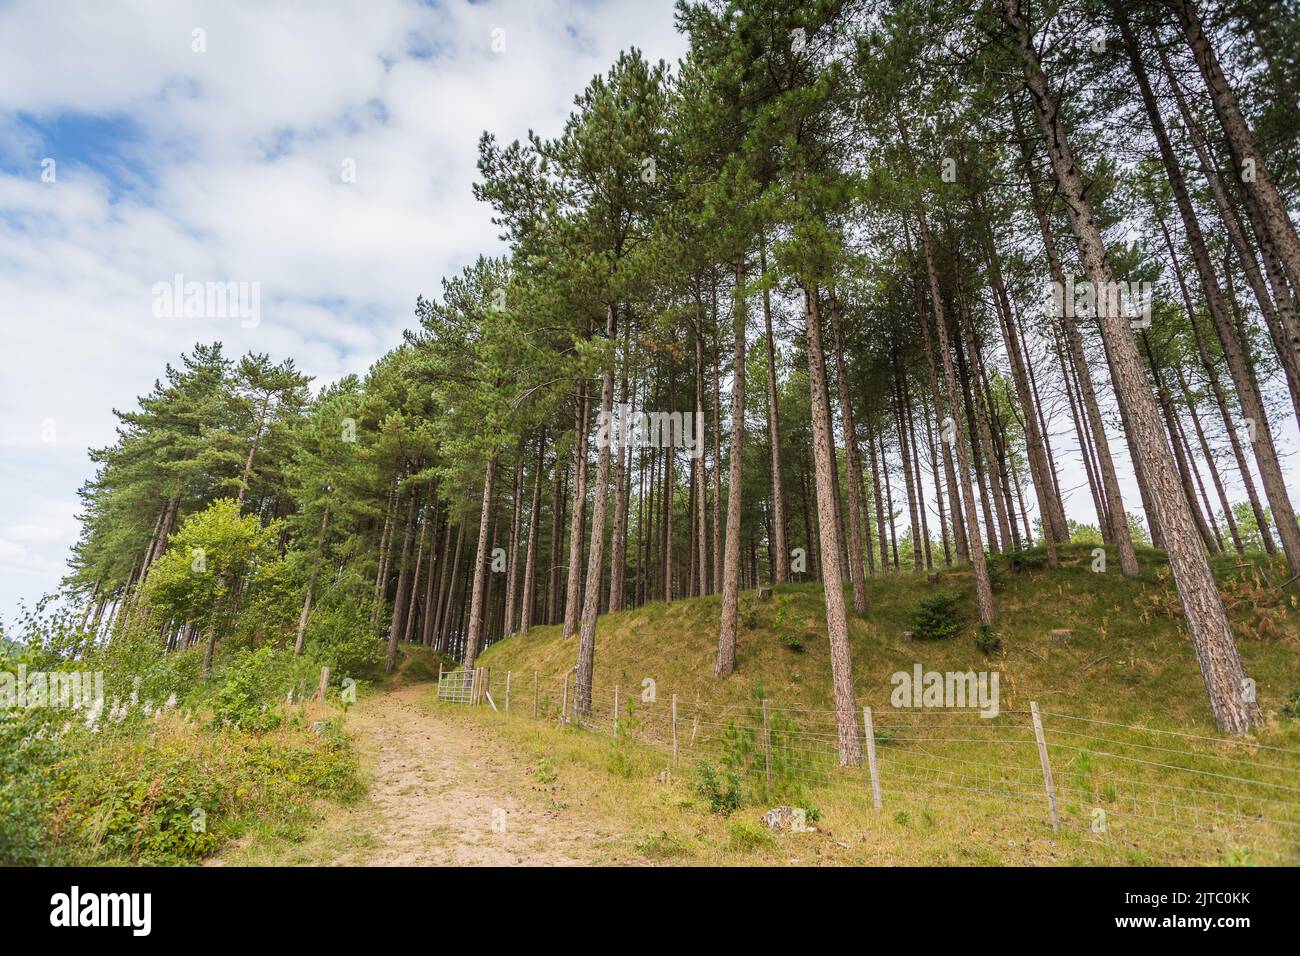 Tall and straight pine trees seen behind a fenced area on the outskirts of Formby Forest near Liverpool. Stock Photo